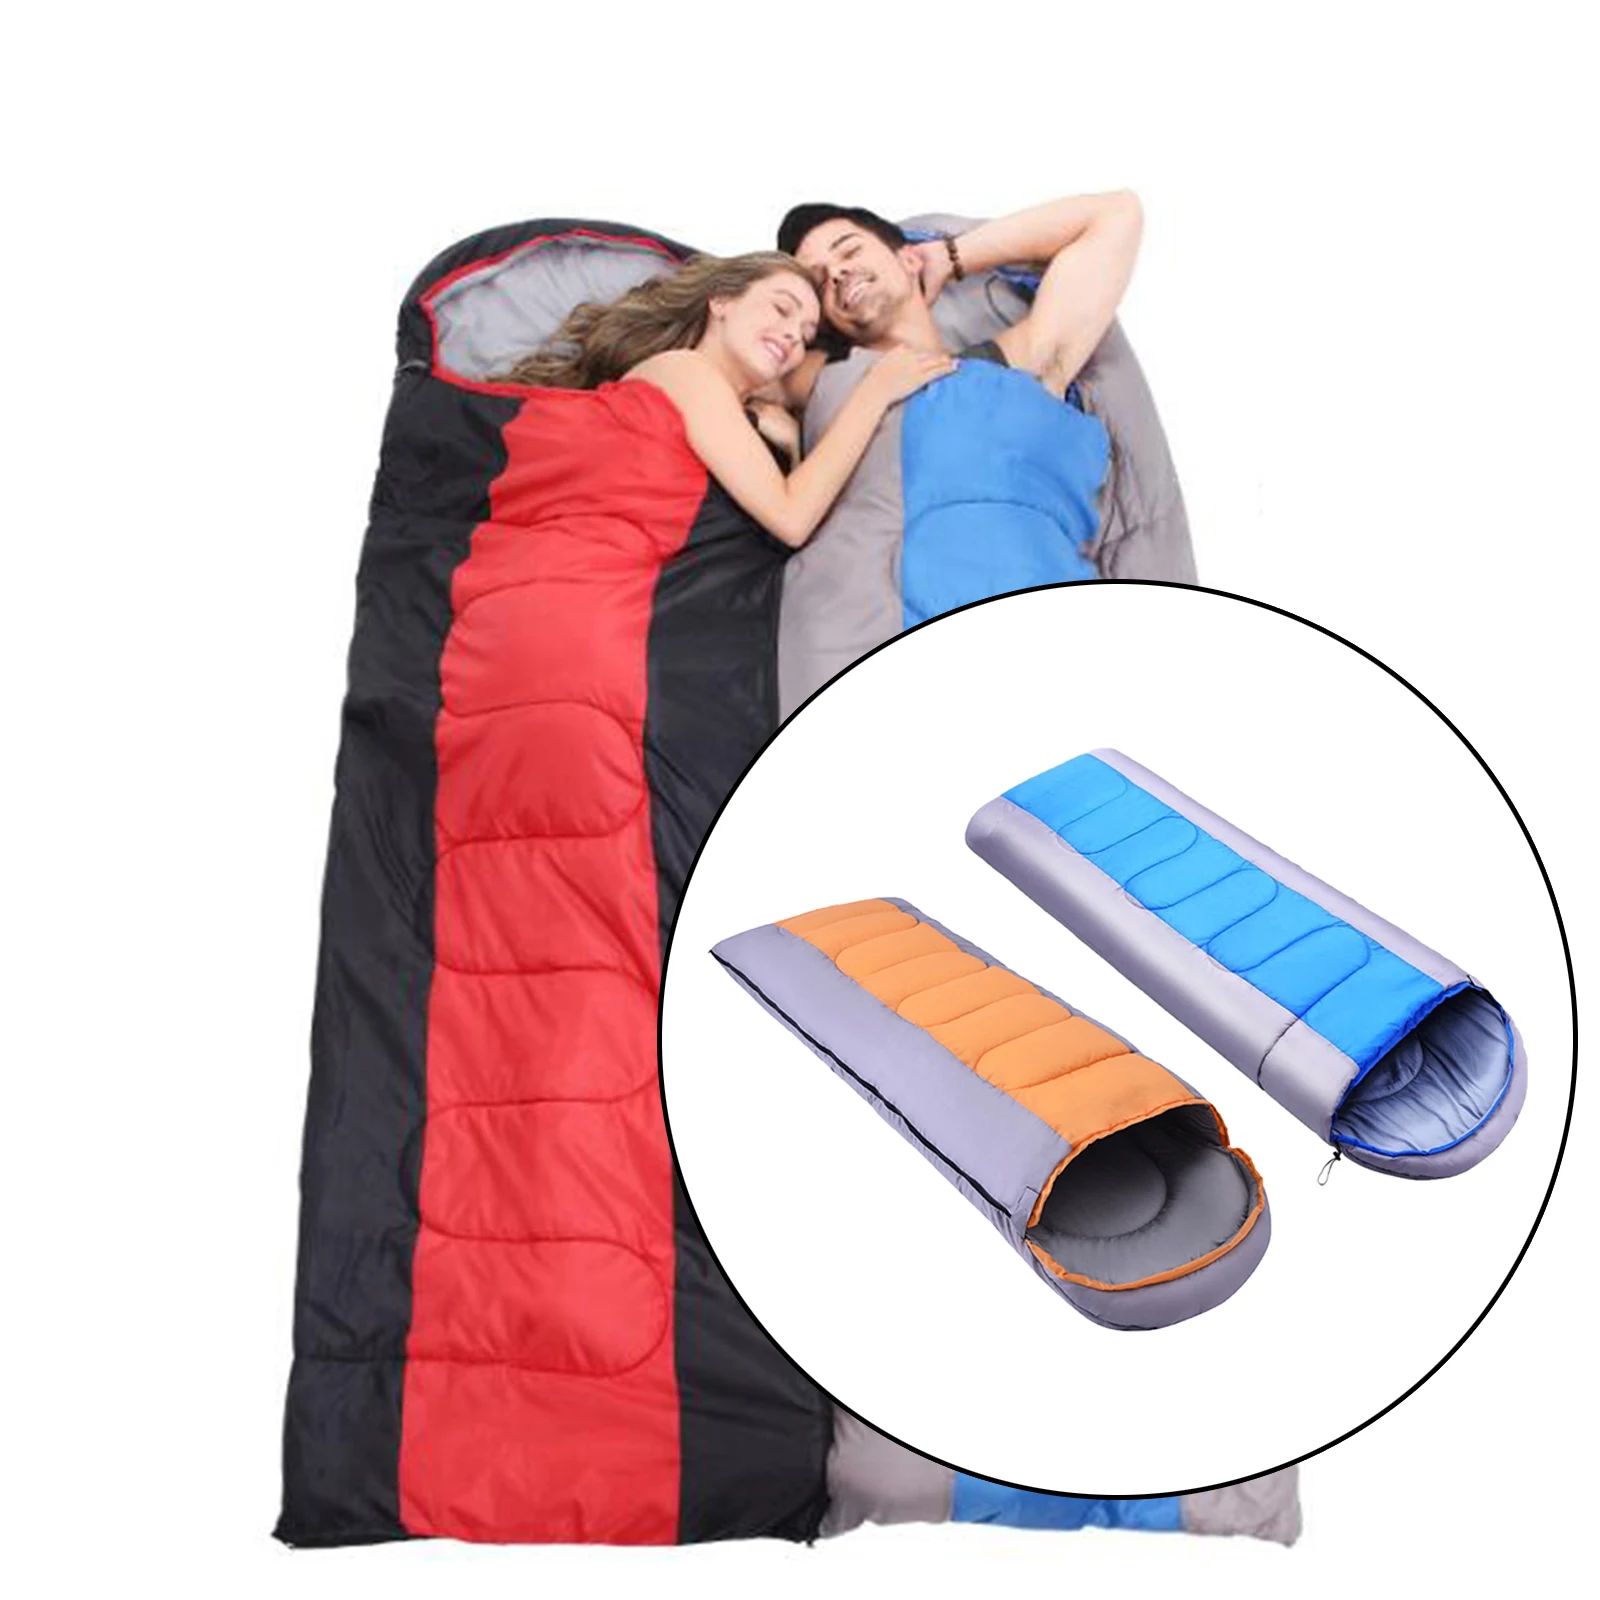 Sleeping Bag Indoor Outdoor Zippered Holes for Feet Compact Wearable Ultralight for Backpacking Women Youth Girls Teens